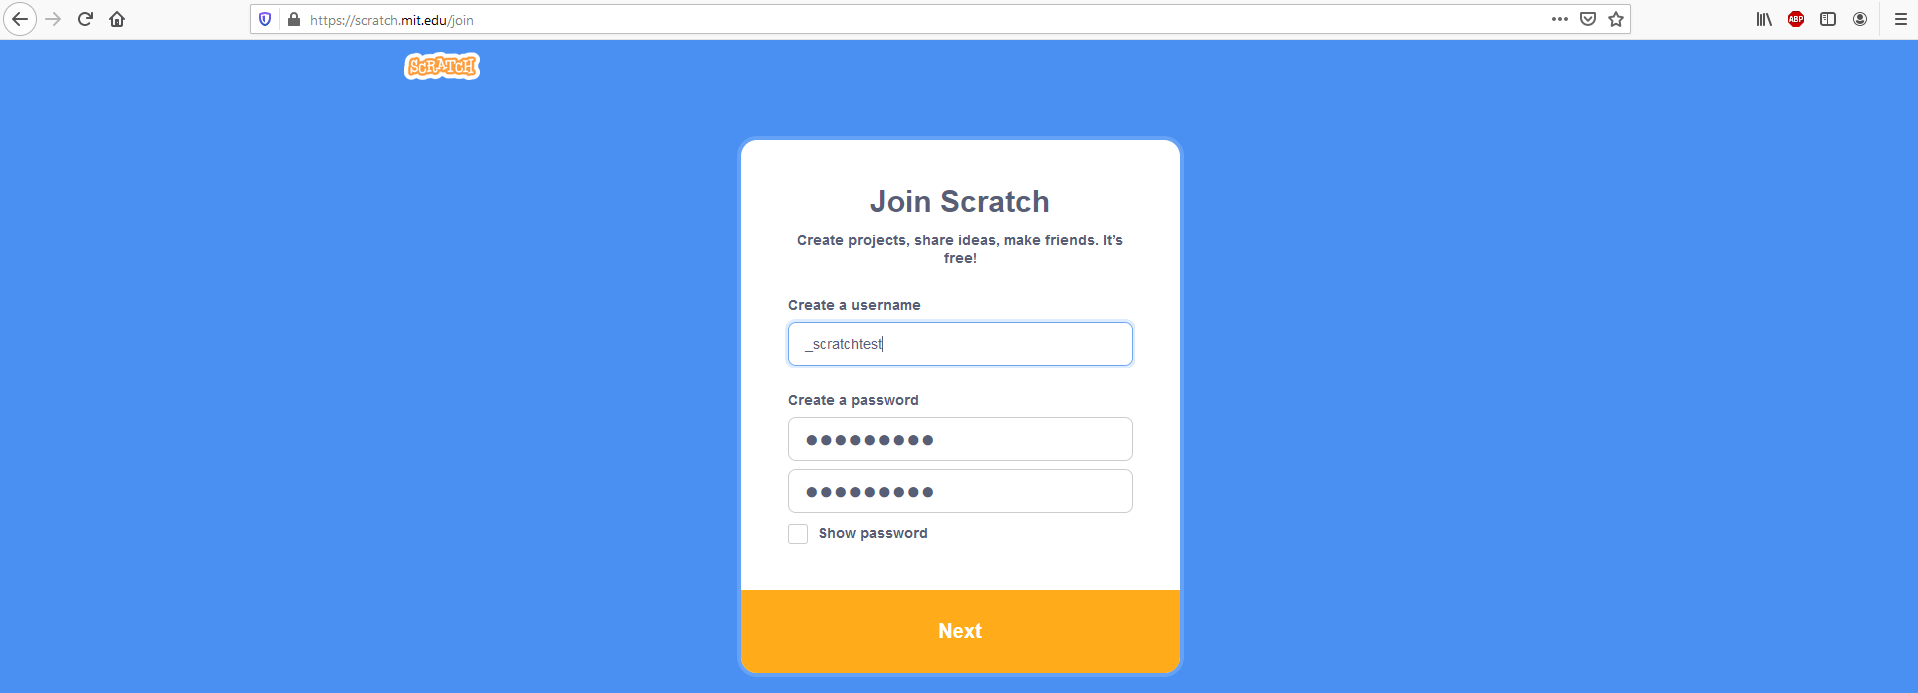 “Join Scratch”: window for creating a Scratch user account